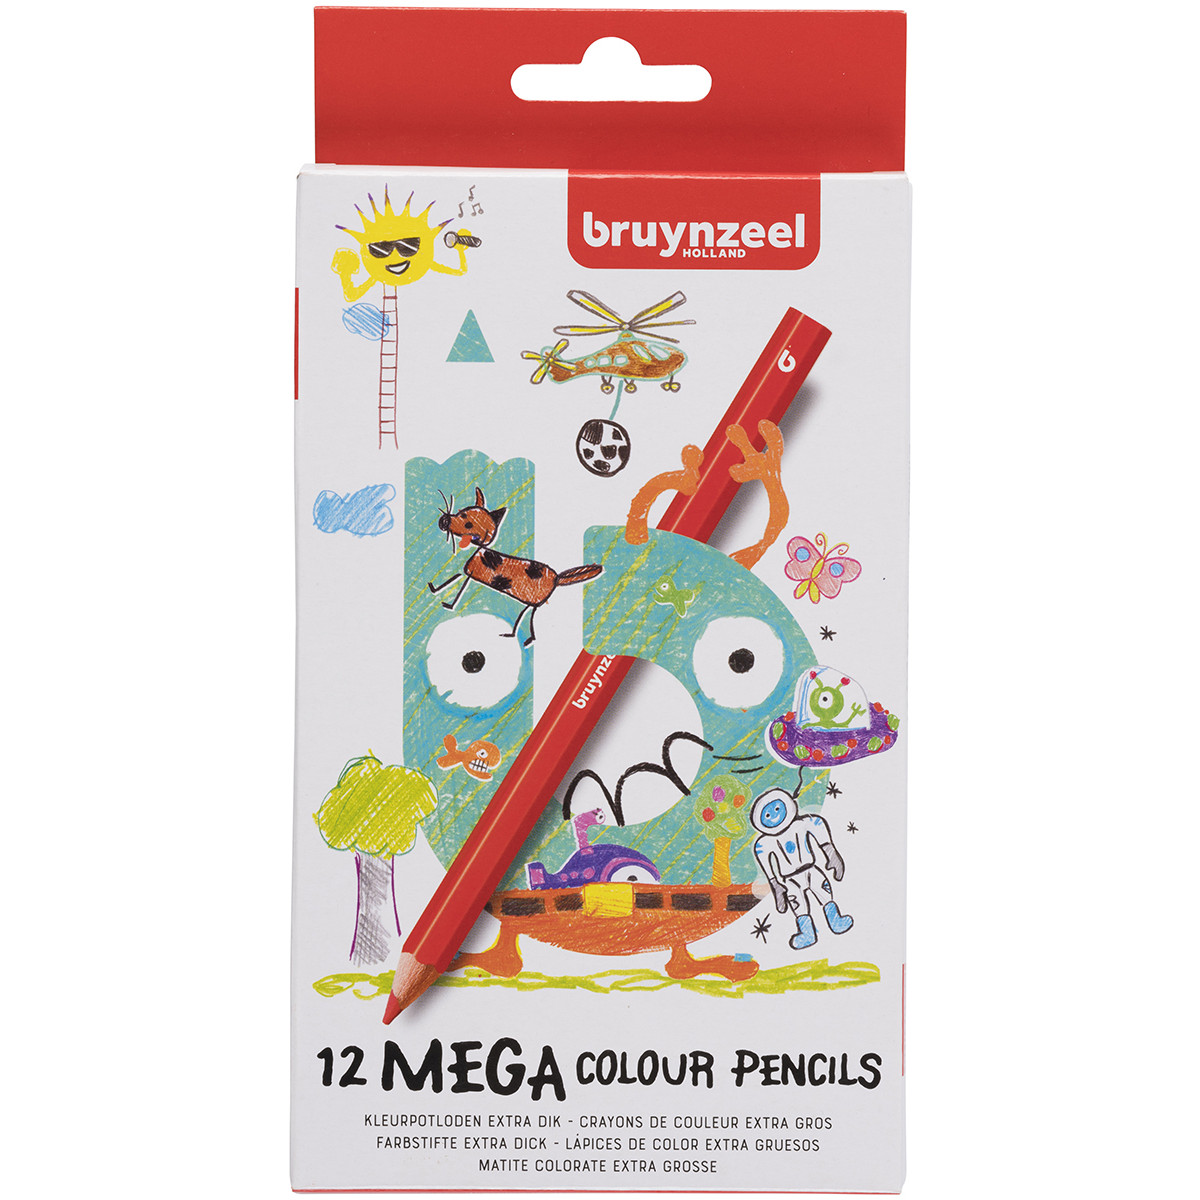 Bruynzeel Mega Colour Pencils - Assorted Colours (Pack of 10)